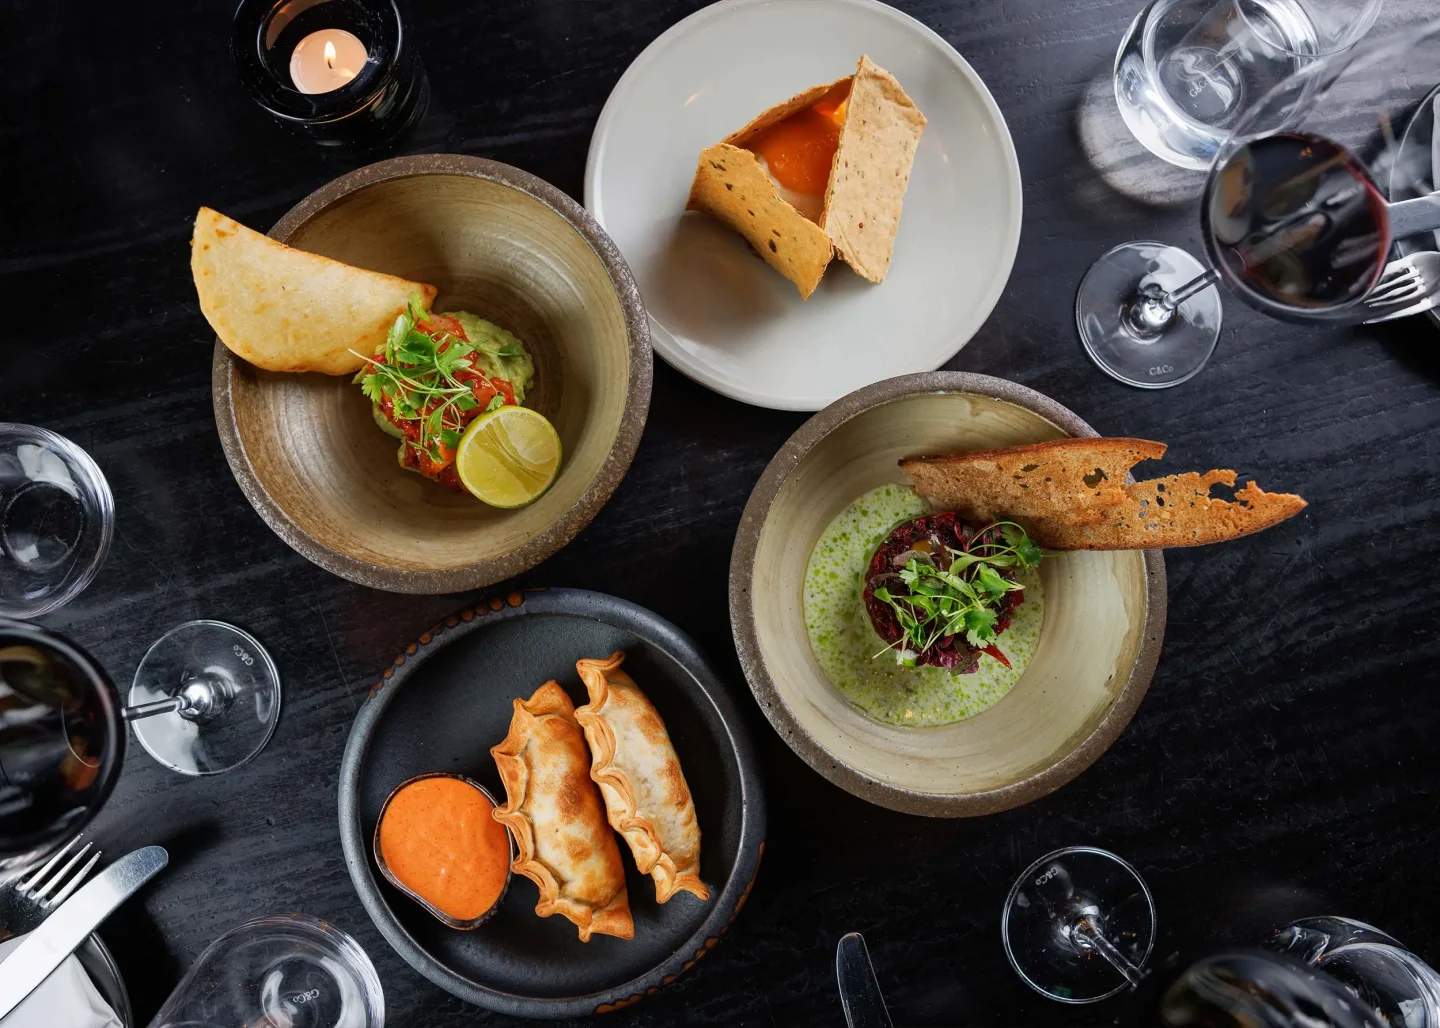 Small-plate-selection-from-Gaucho-Restaurant-in-Birmingham-one-of-many-great-restaurants-at-the-Birmingham-Restaurant-Festival-2022